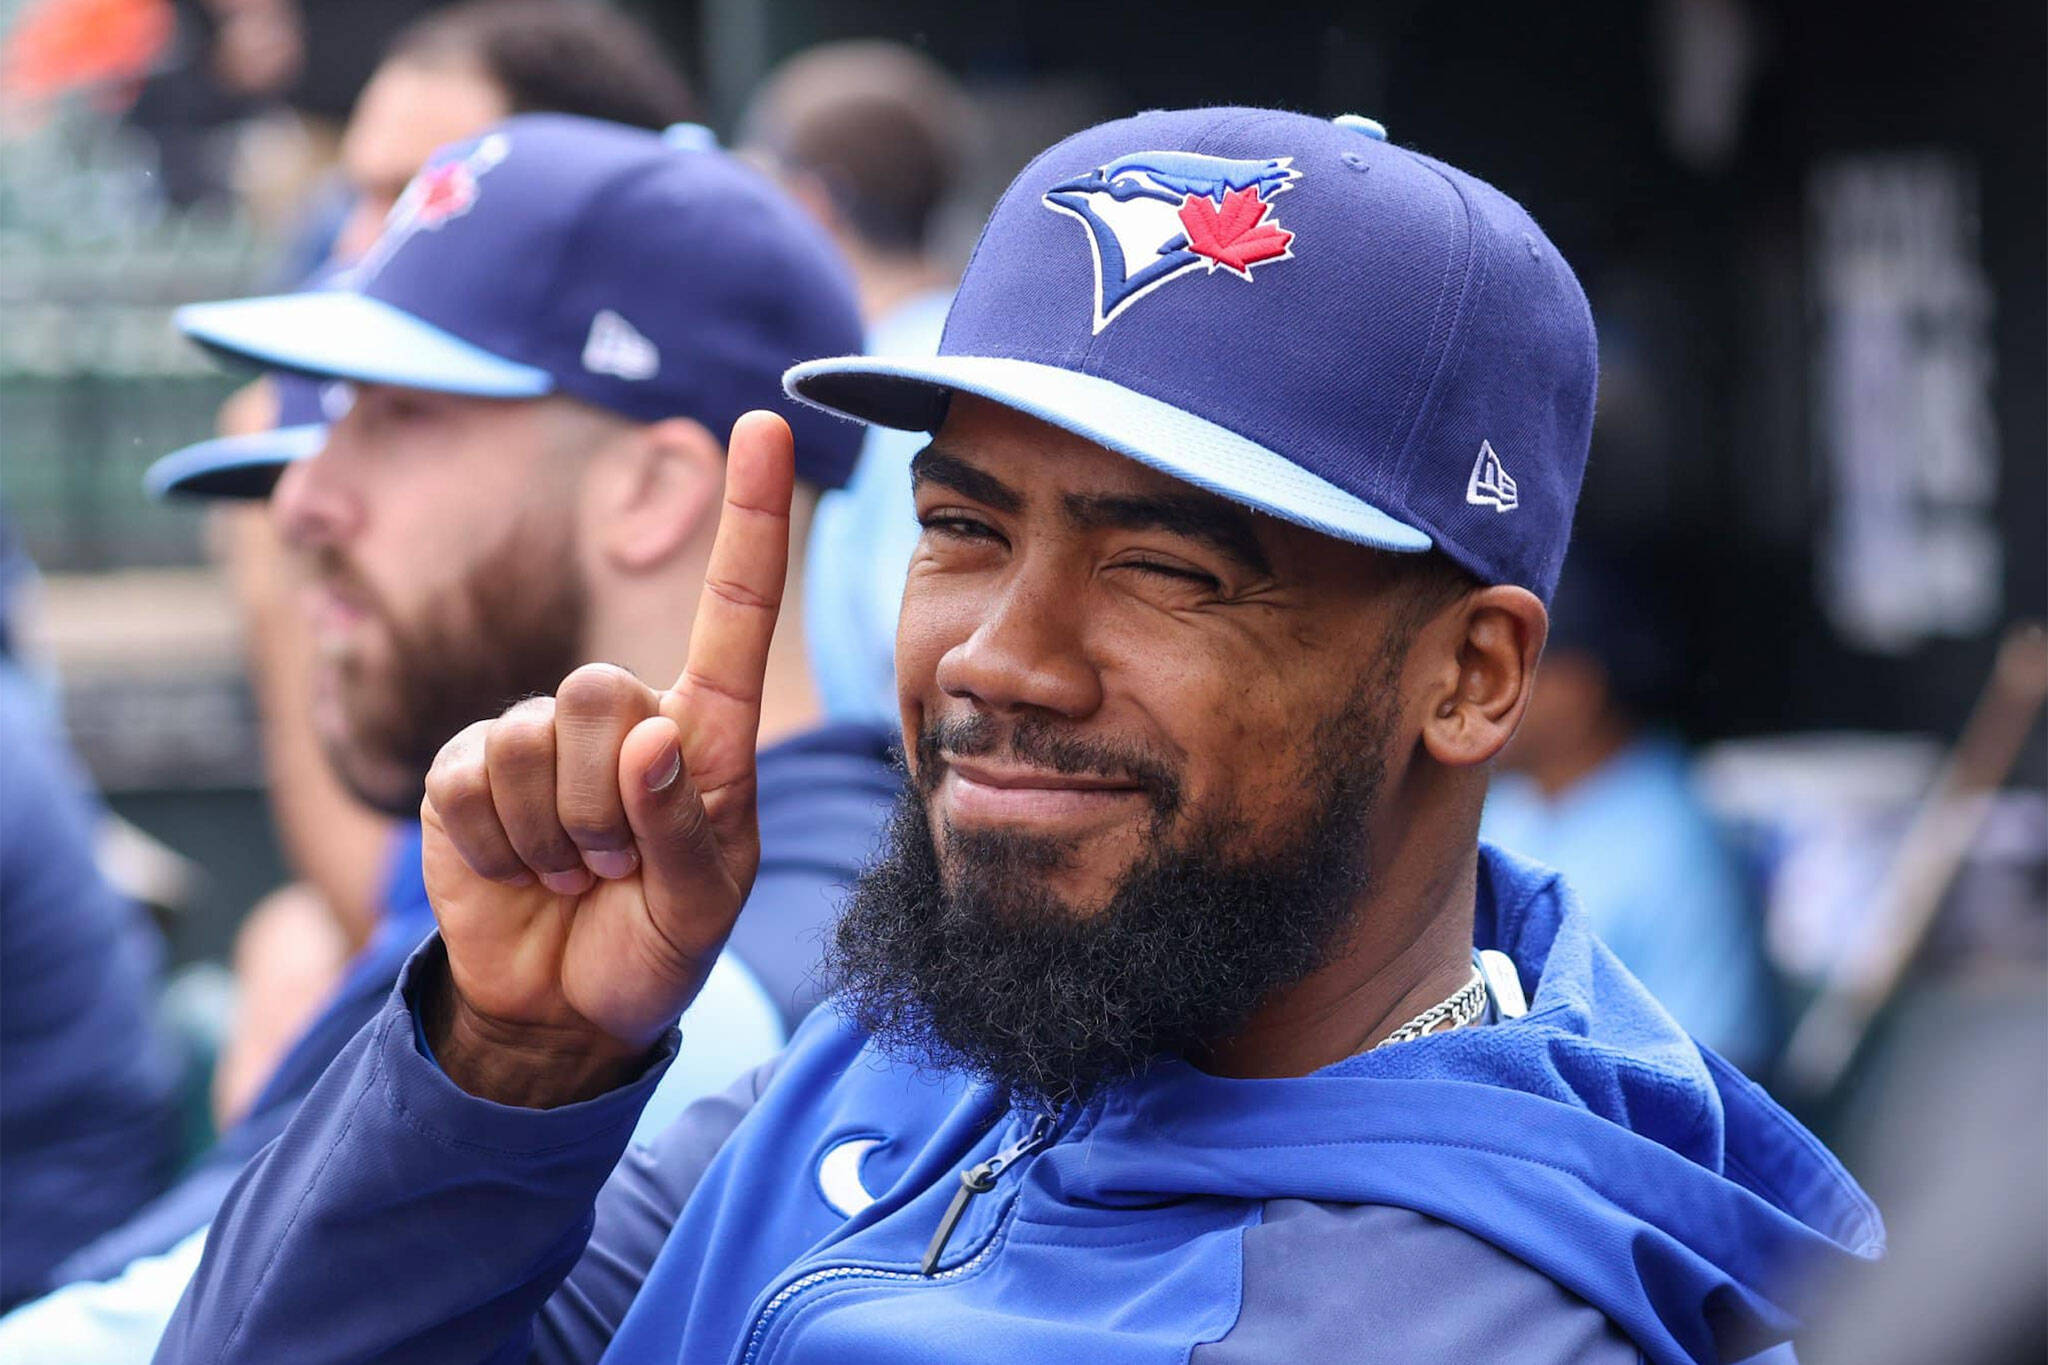 Teoscar Hernández extension comparable contracts with Blue Jays